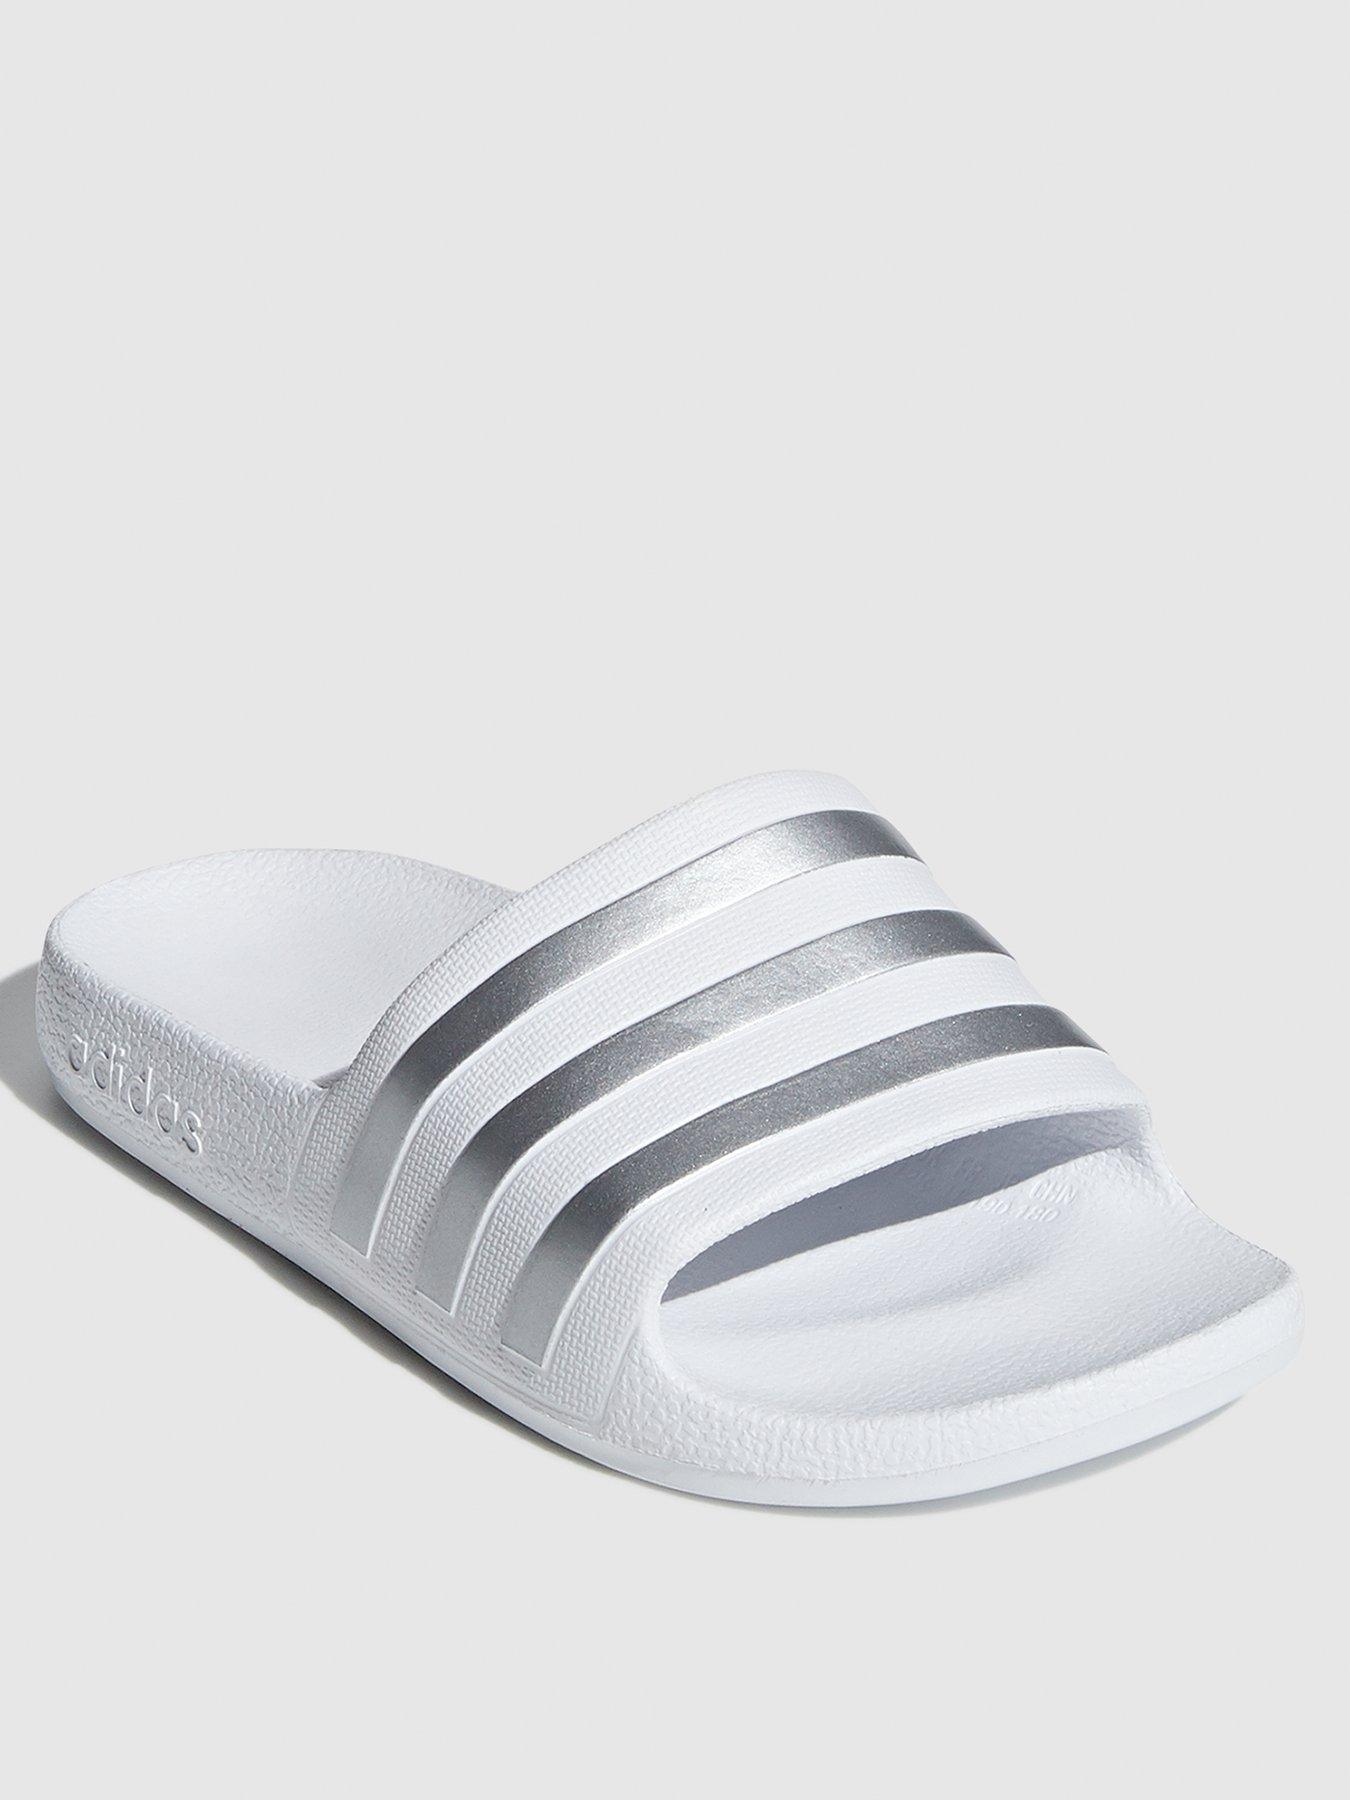 white and silver sliders